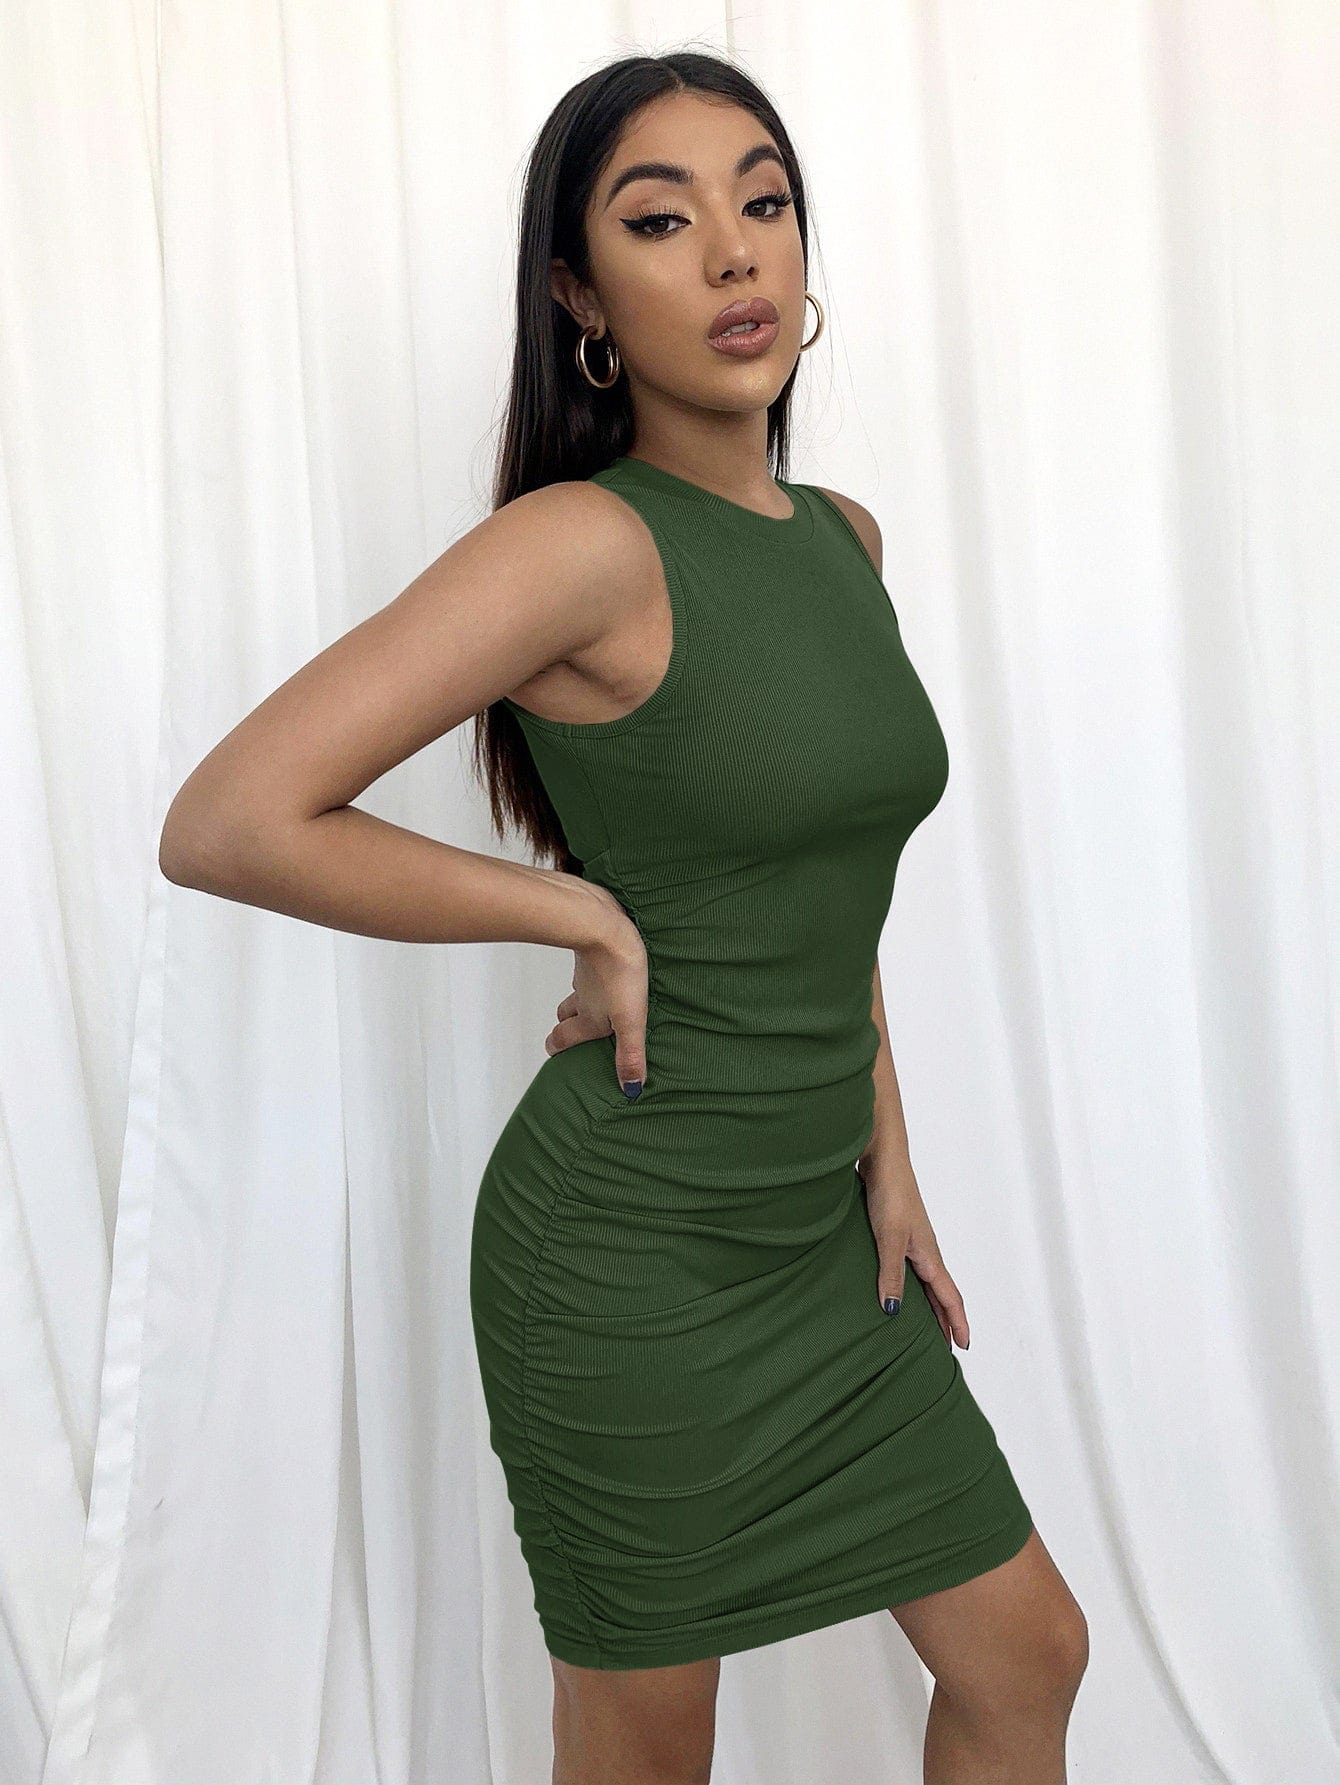 2022 European and American women's vest dress mint green slim sexy knitted skirt solid color pleated sleeveless dress